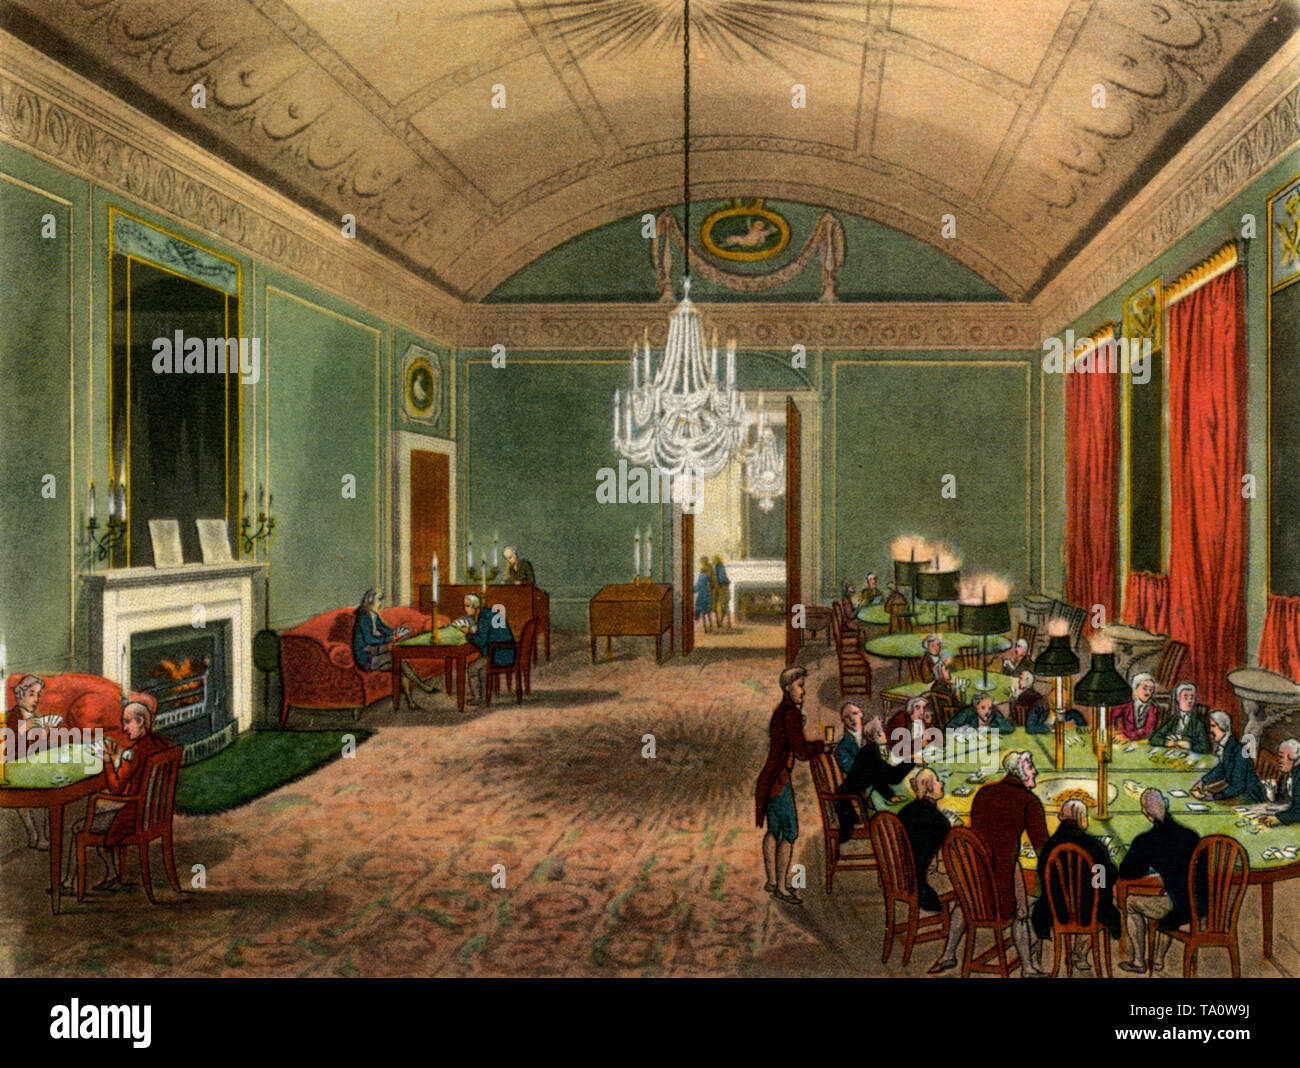 The Great Subscription Room, Brooks's Club, St. James's Street, c1808-1810. A print from 'The Microcosm of London', by William Henry Pyne (1770-1843). Illustrated by Thomas Rowlandson (1756-1827) and Auguste Charles Pugin (1762-1832). The current home of the gentlemen's club opened in 1778 and its principle architect was Henry Holland. The Great Subscription Room acted as one of the many gaming rooms for which the club was famous. Stock Photo